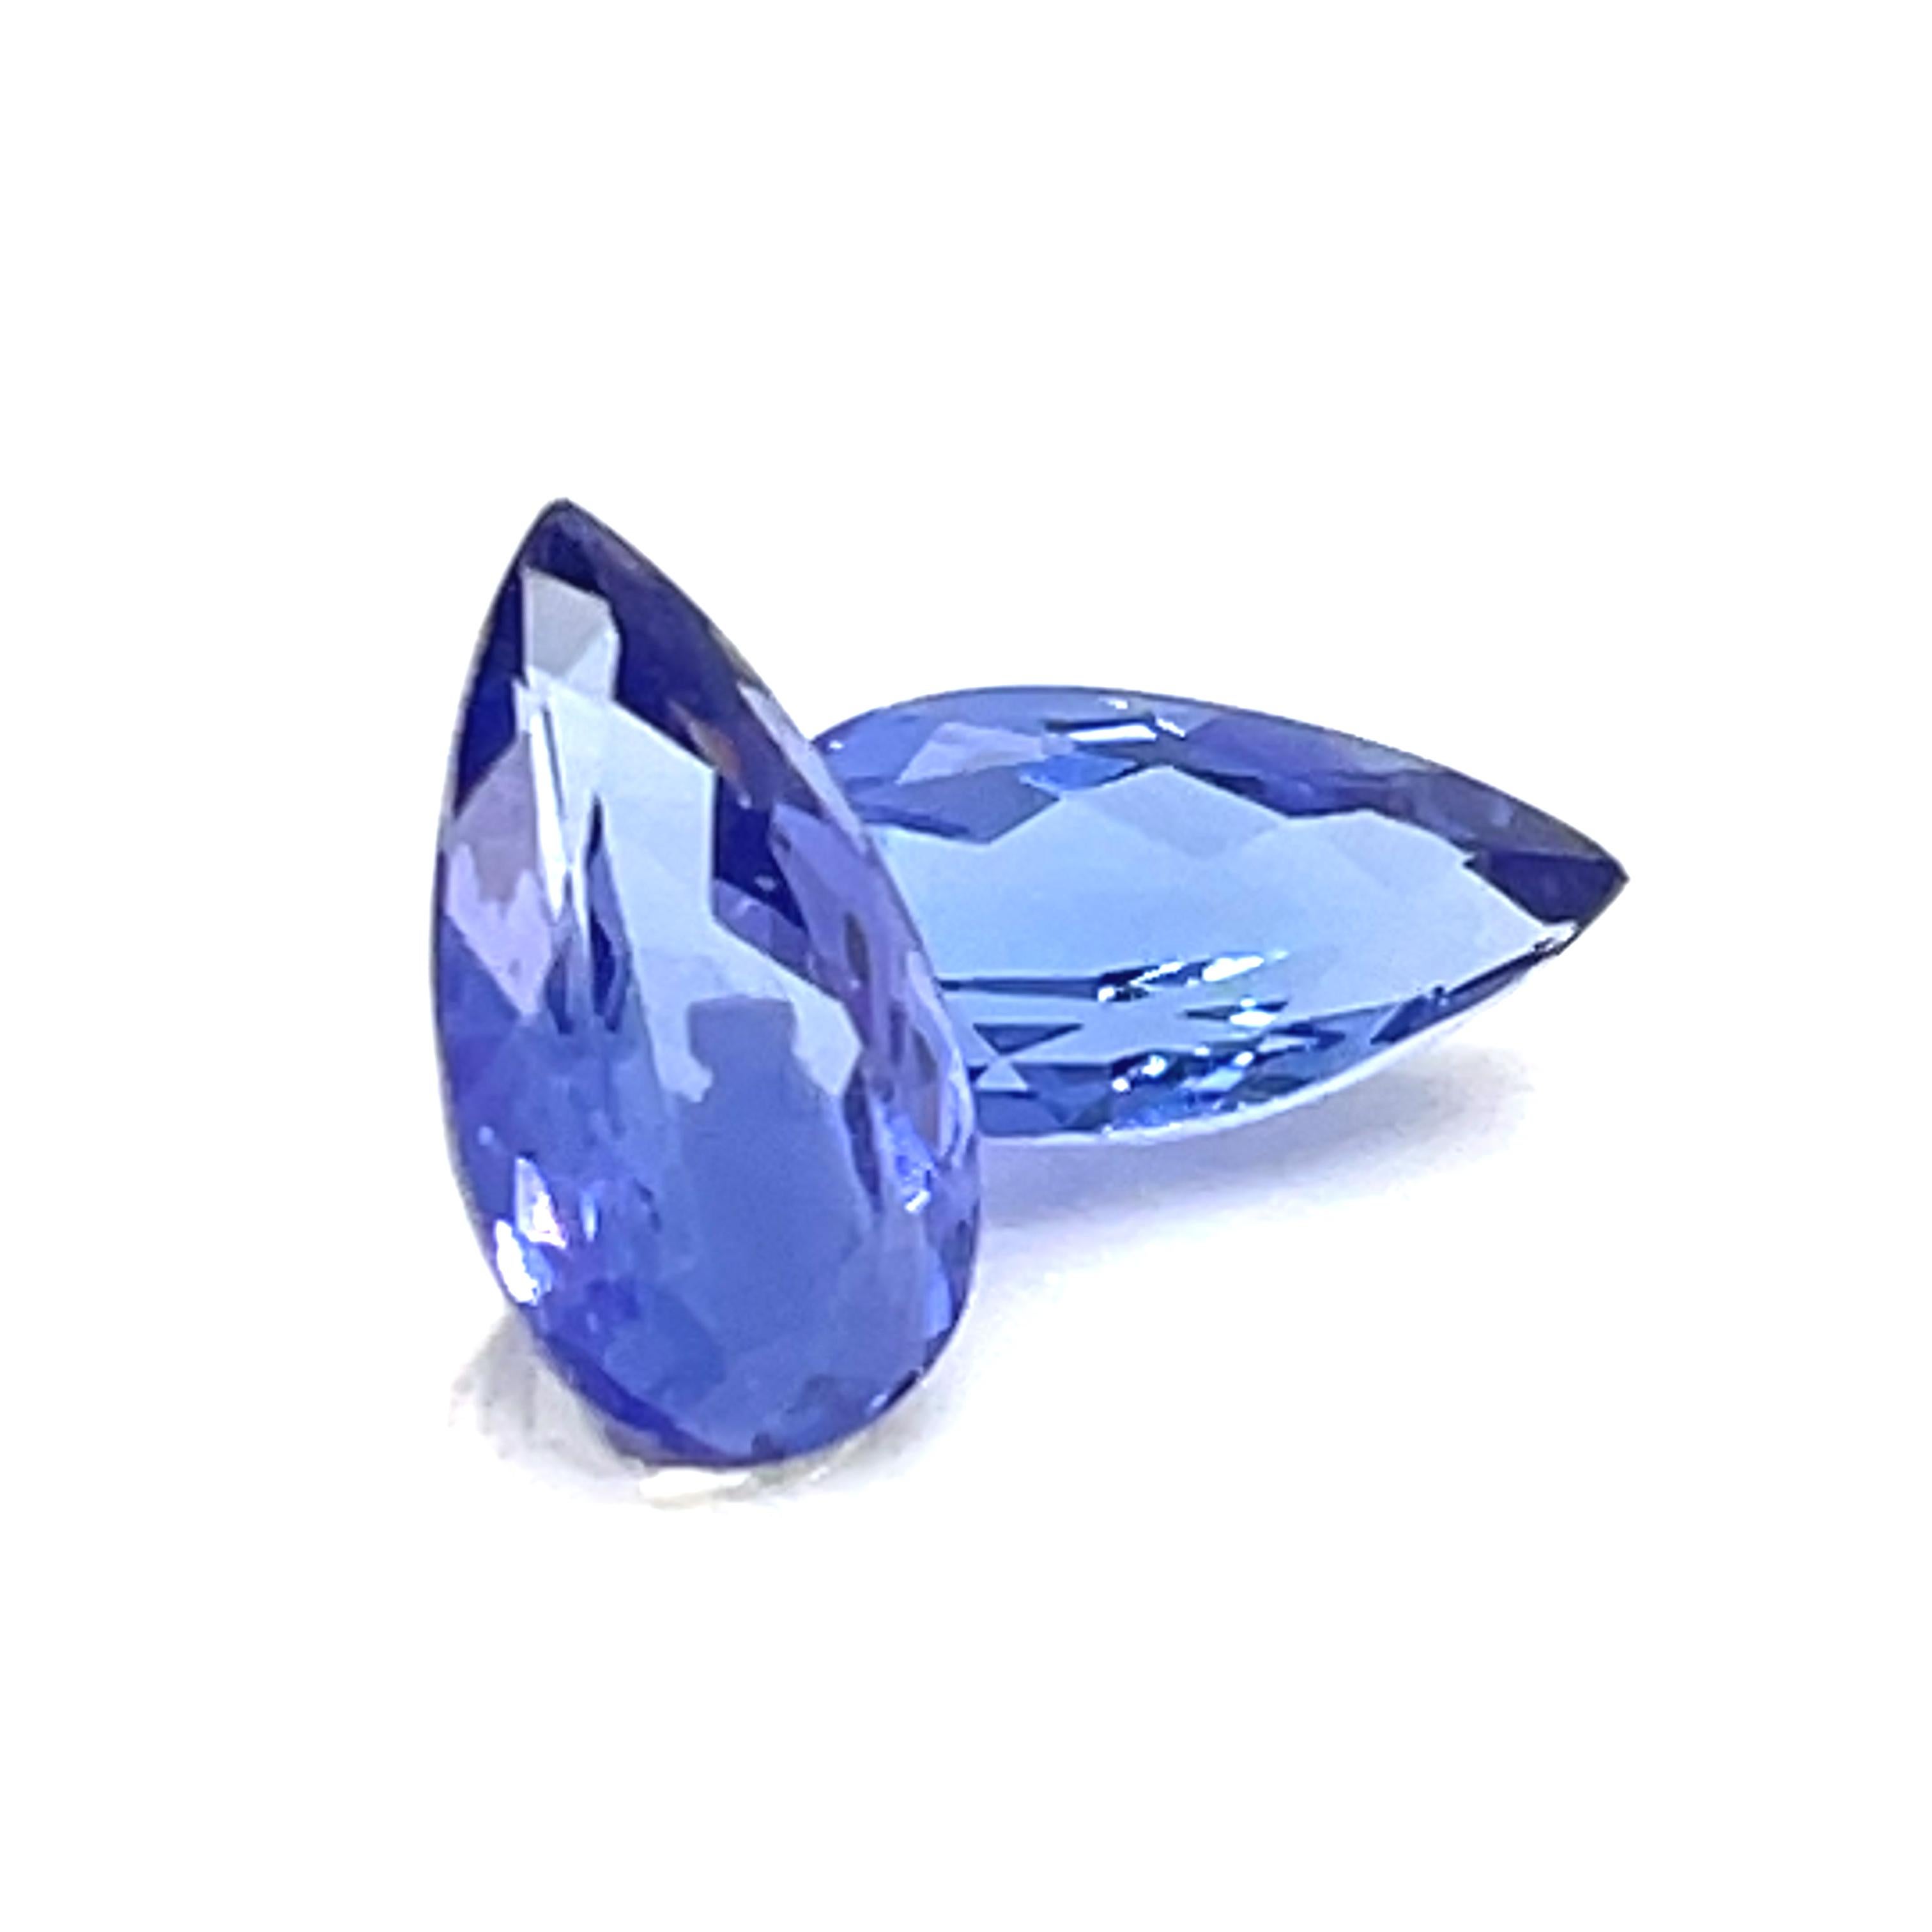 Picture having a piece of Tanzanian beauty that shimmers with the hues of the sky in your palm. 

These two gorgeous violetish blue pear tanzanite stones weigh 4.05 carats. 

They are sourced from Tanzania, a country renowned for its vivid and